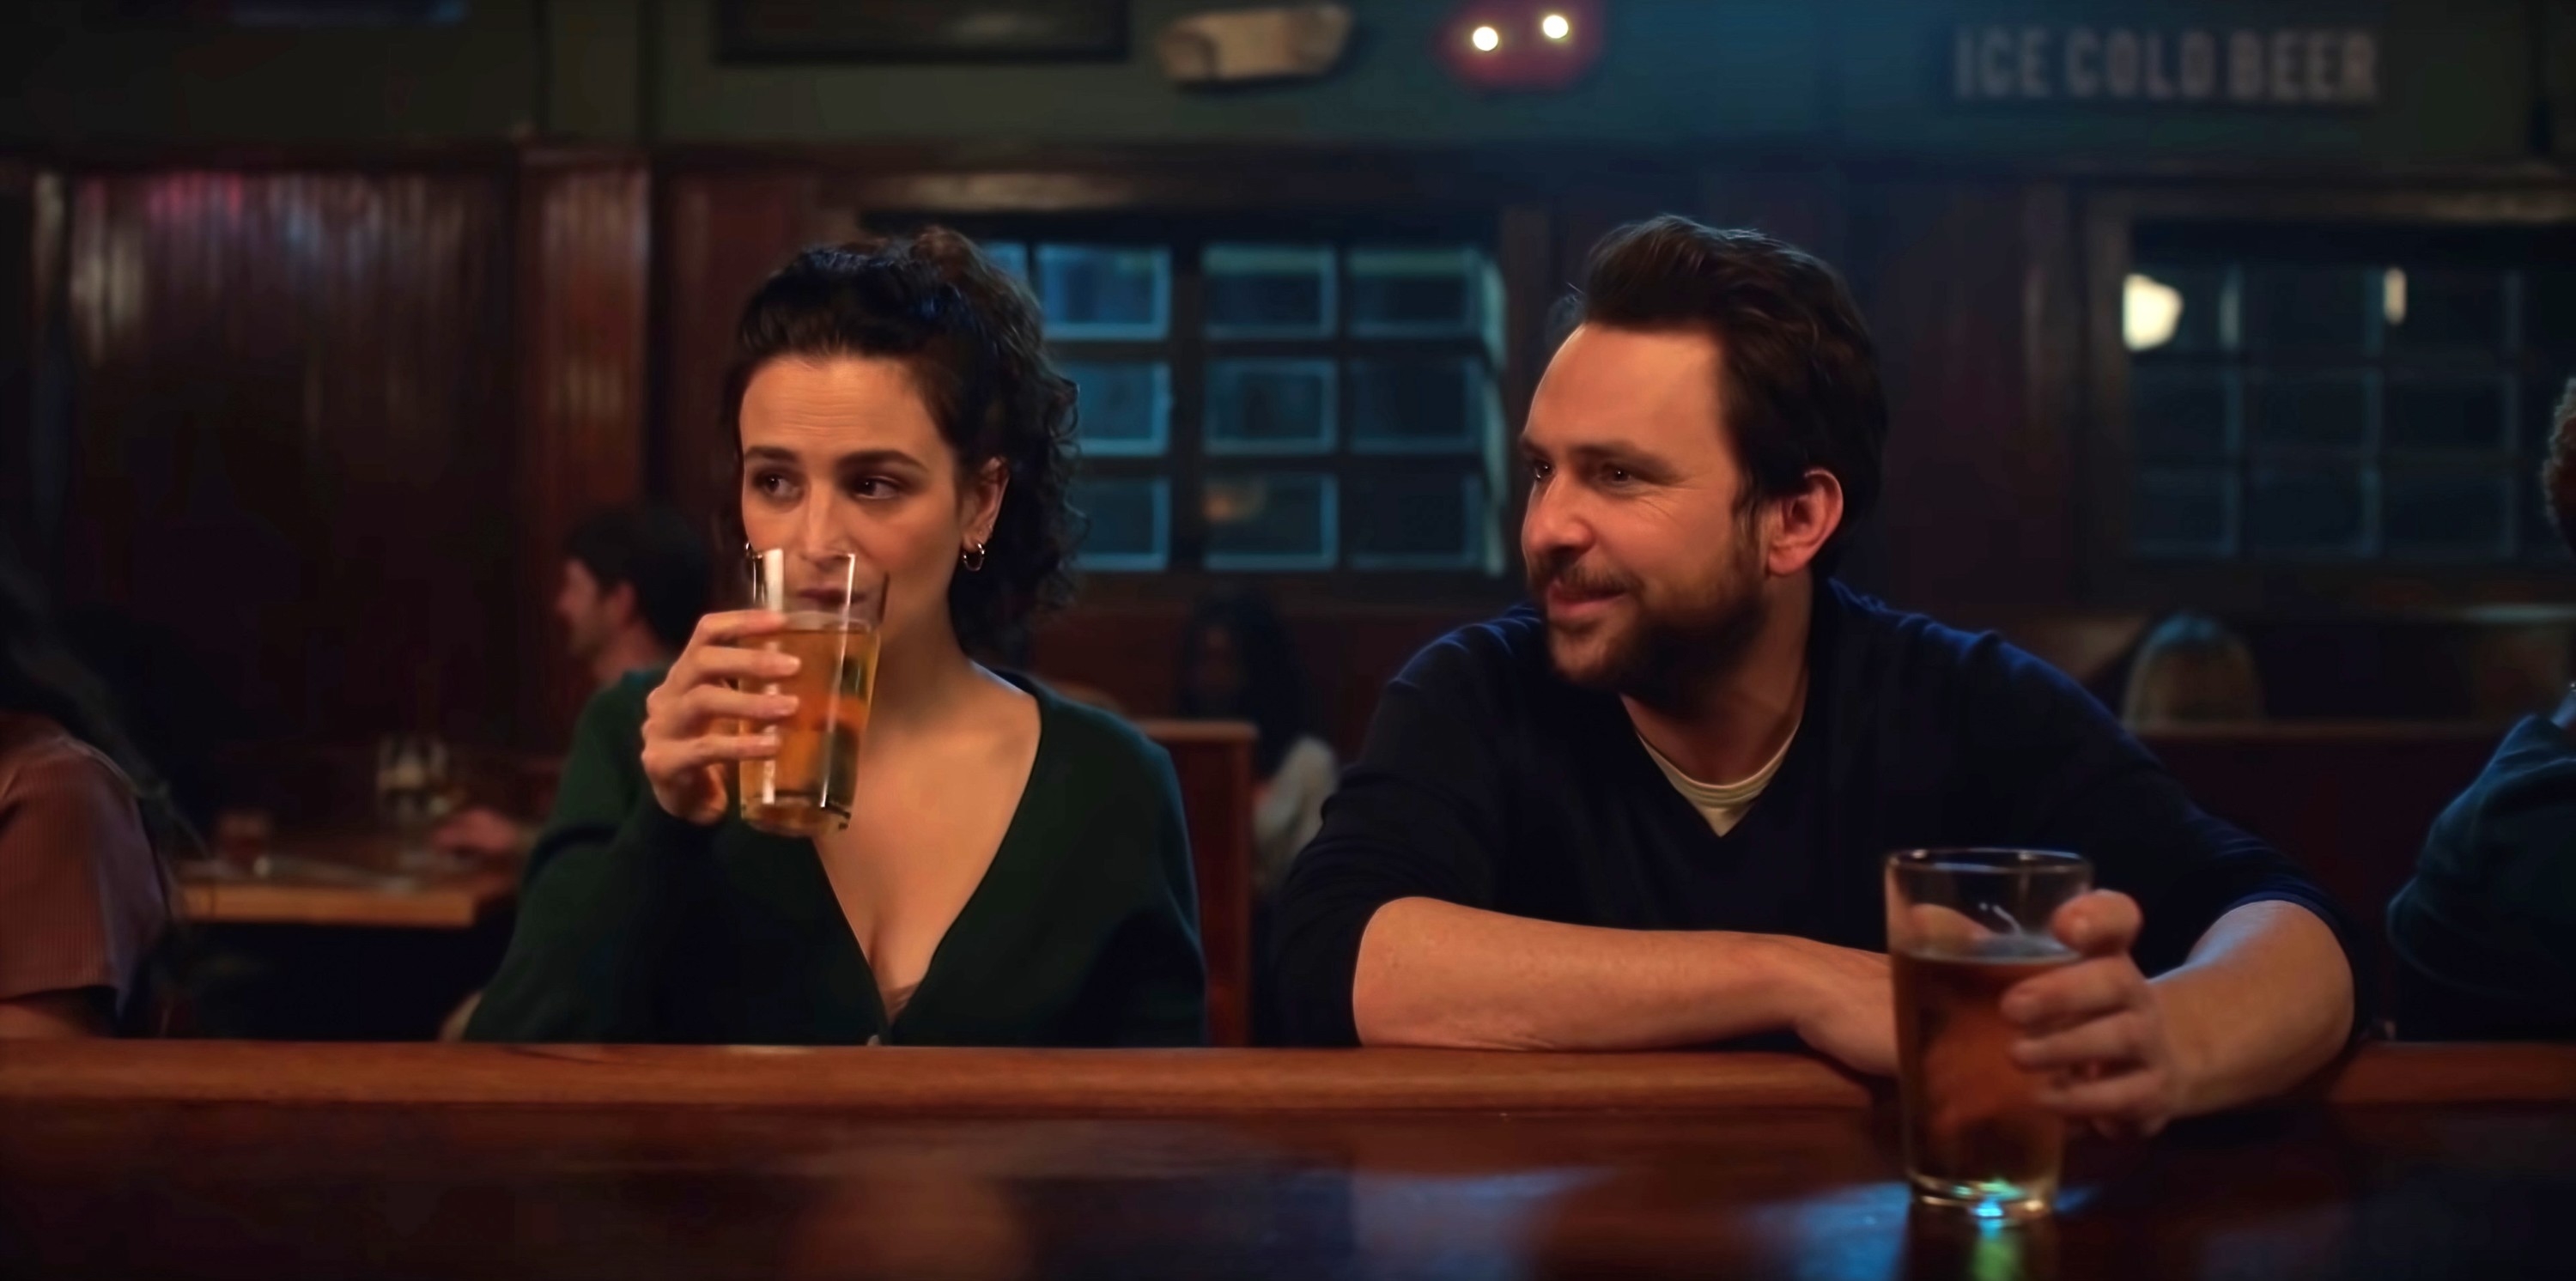 Jenny and Charlie seated at a bar, having drinks, in a scene